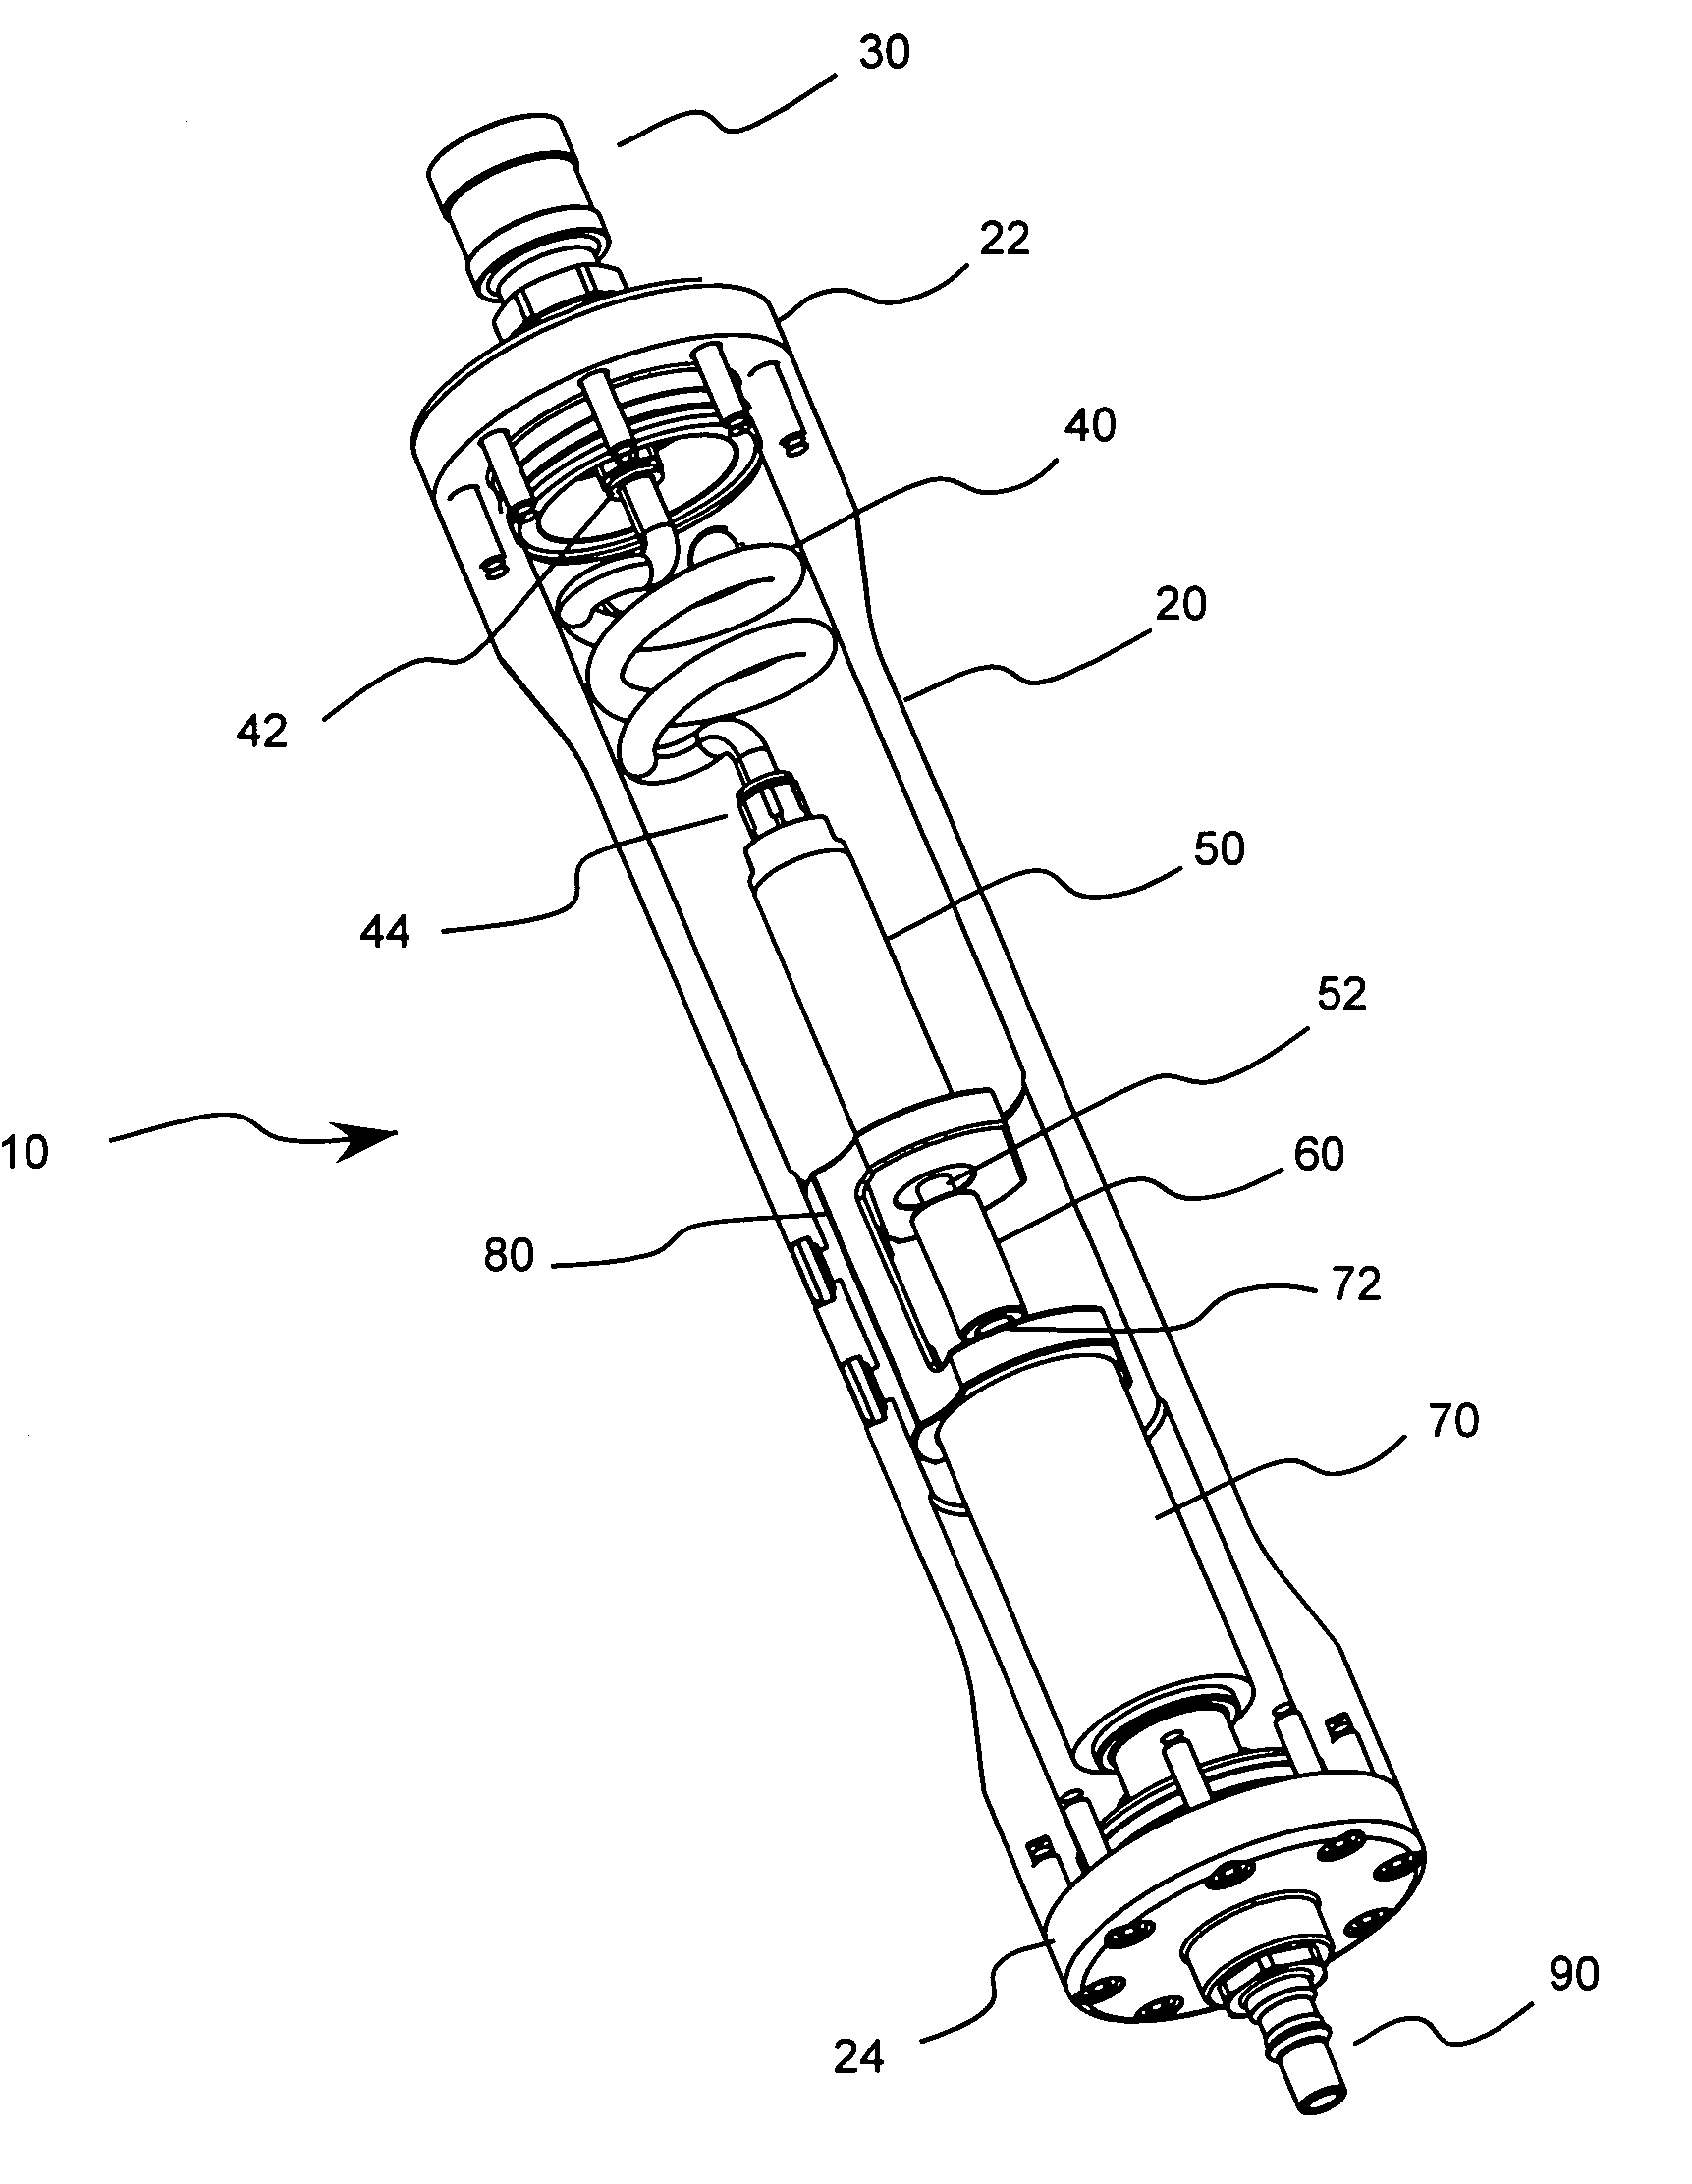 Devices, systems and methods for generating electricity from gases stored in containers under pressure